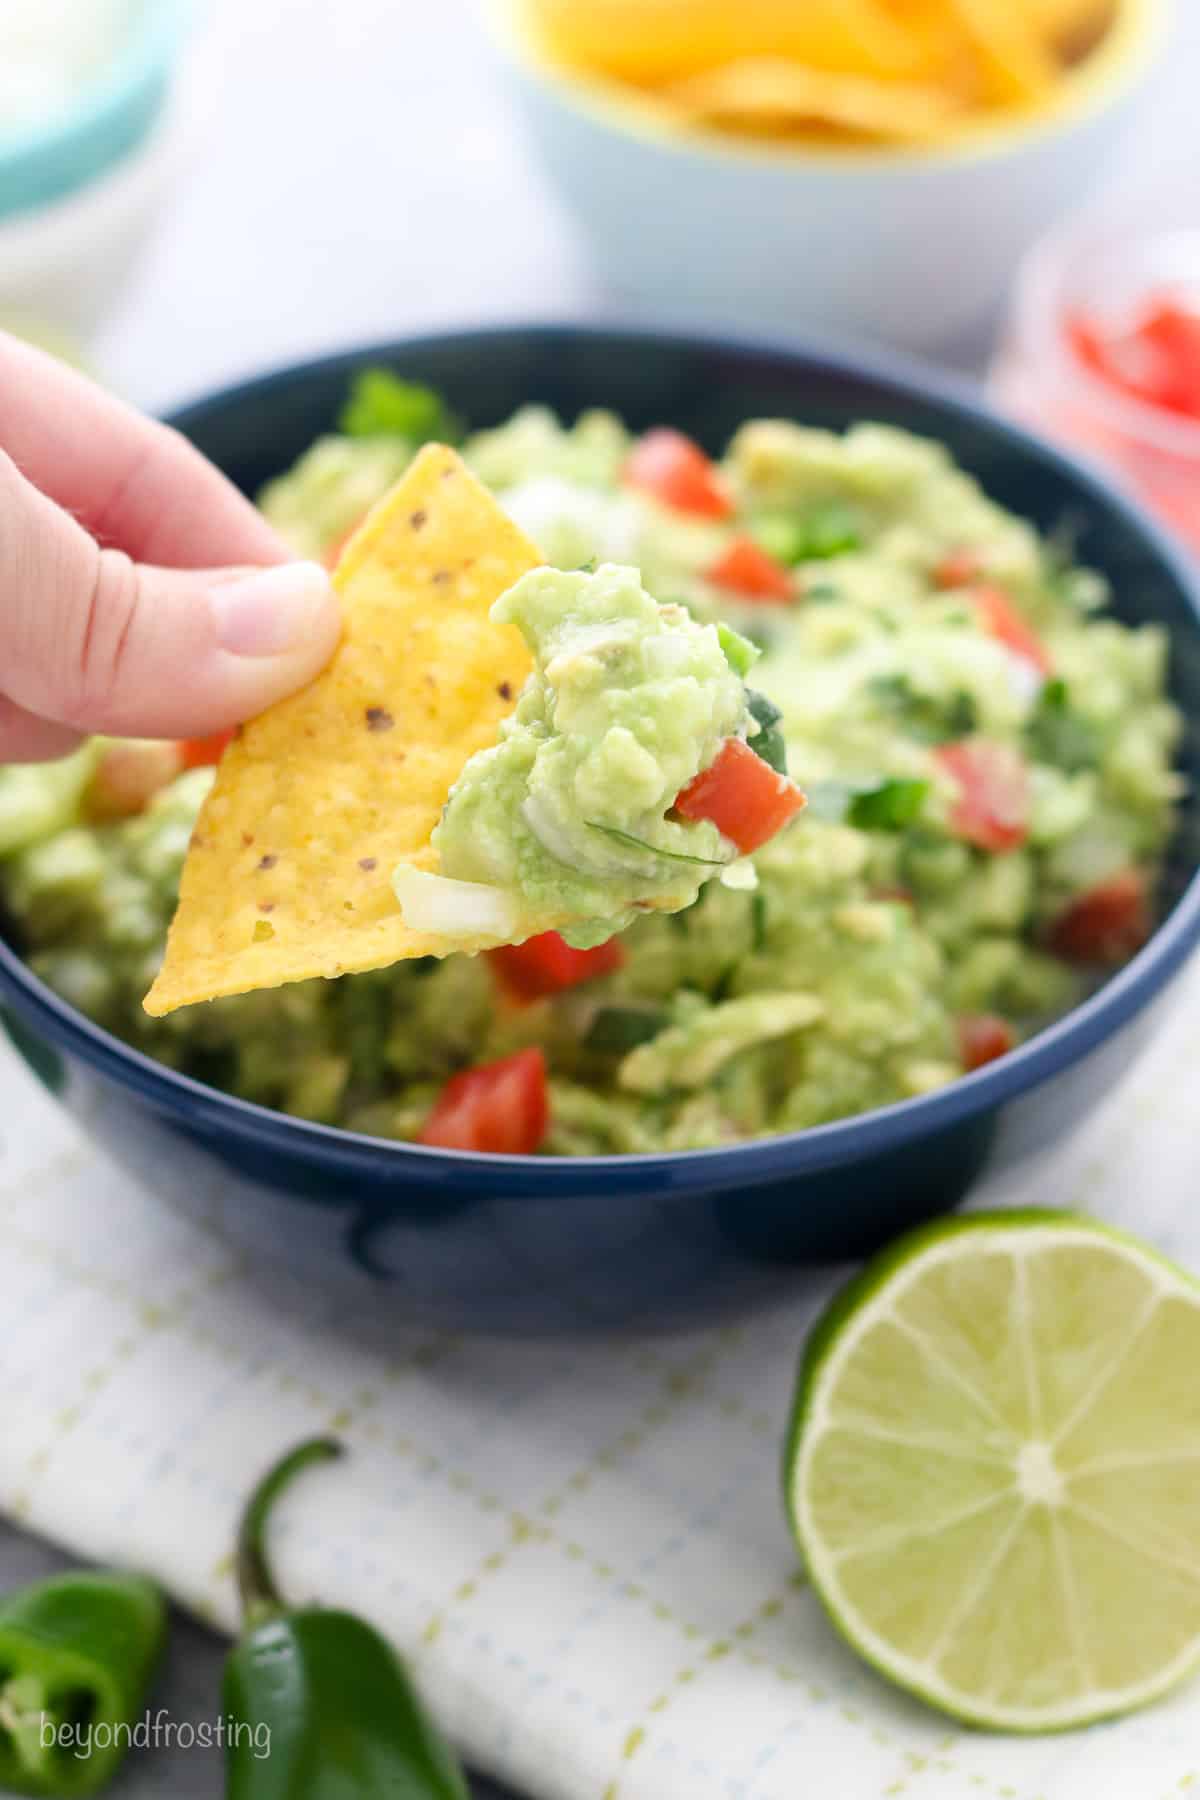 Close up of a hand holding a tortilla chip dipped in guacamole, with a bowl of guacamole in the background next to one half of a lime.